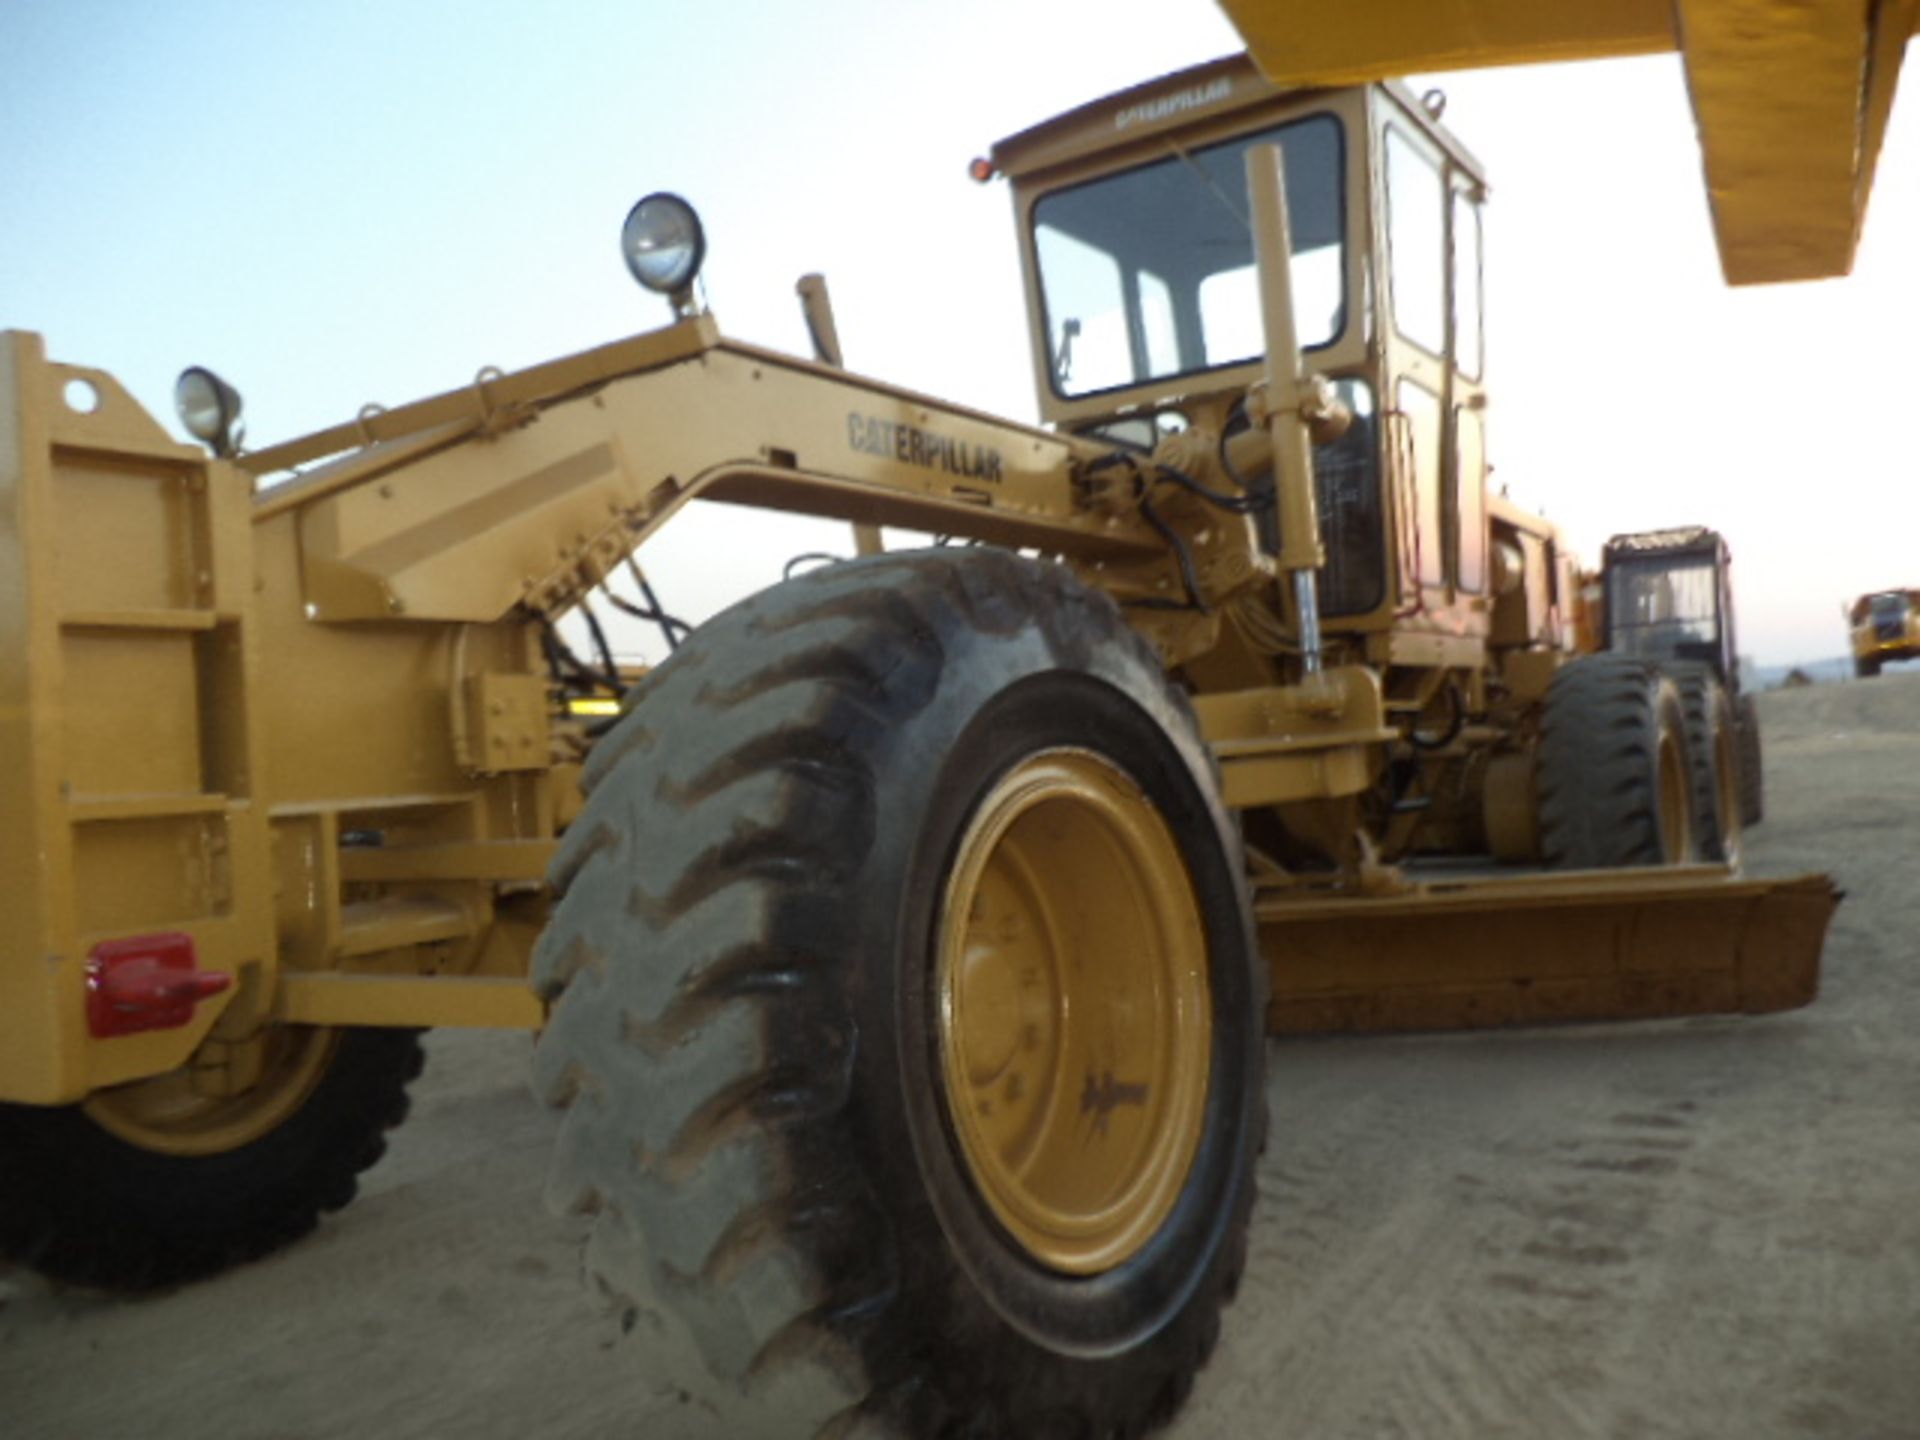 Caterpillar 140G Grader (S#: 50H00899) (8 361 hrs )(LHS Door Doesn't Open, Forks Missing From - Image 2 of 6